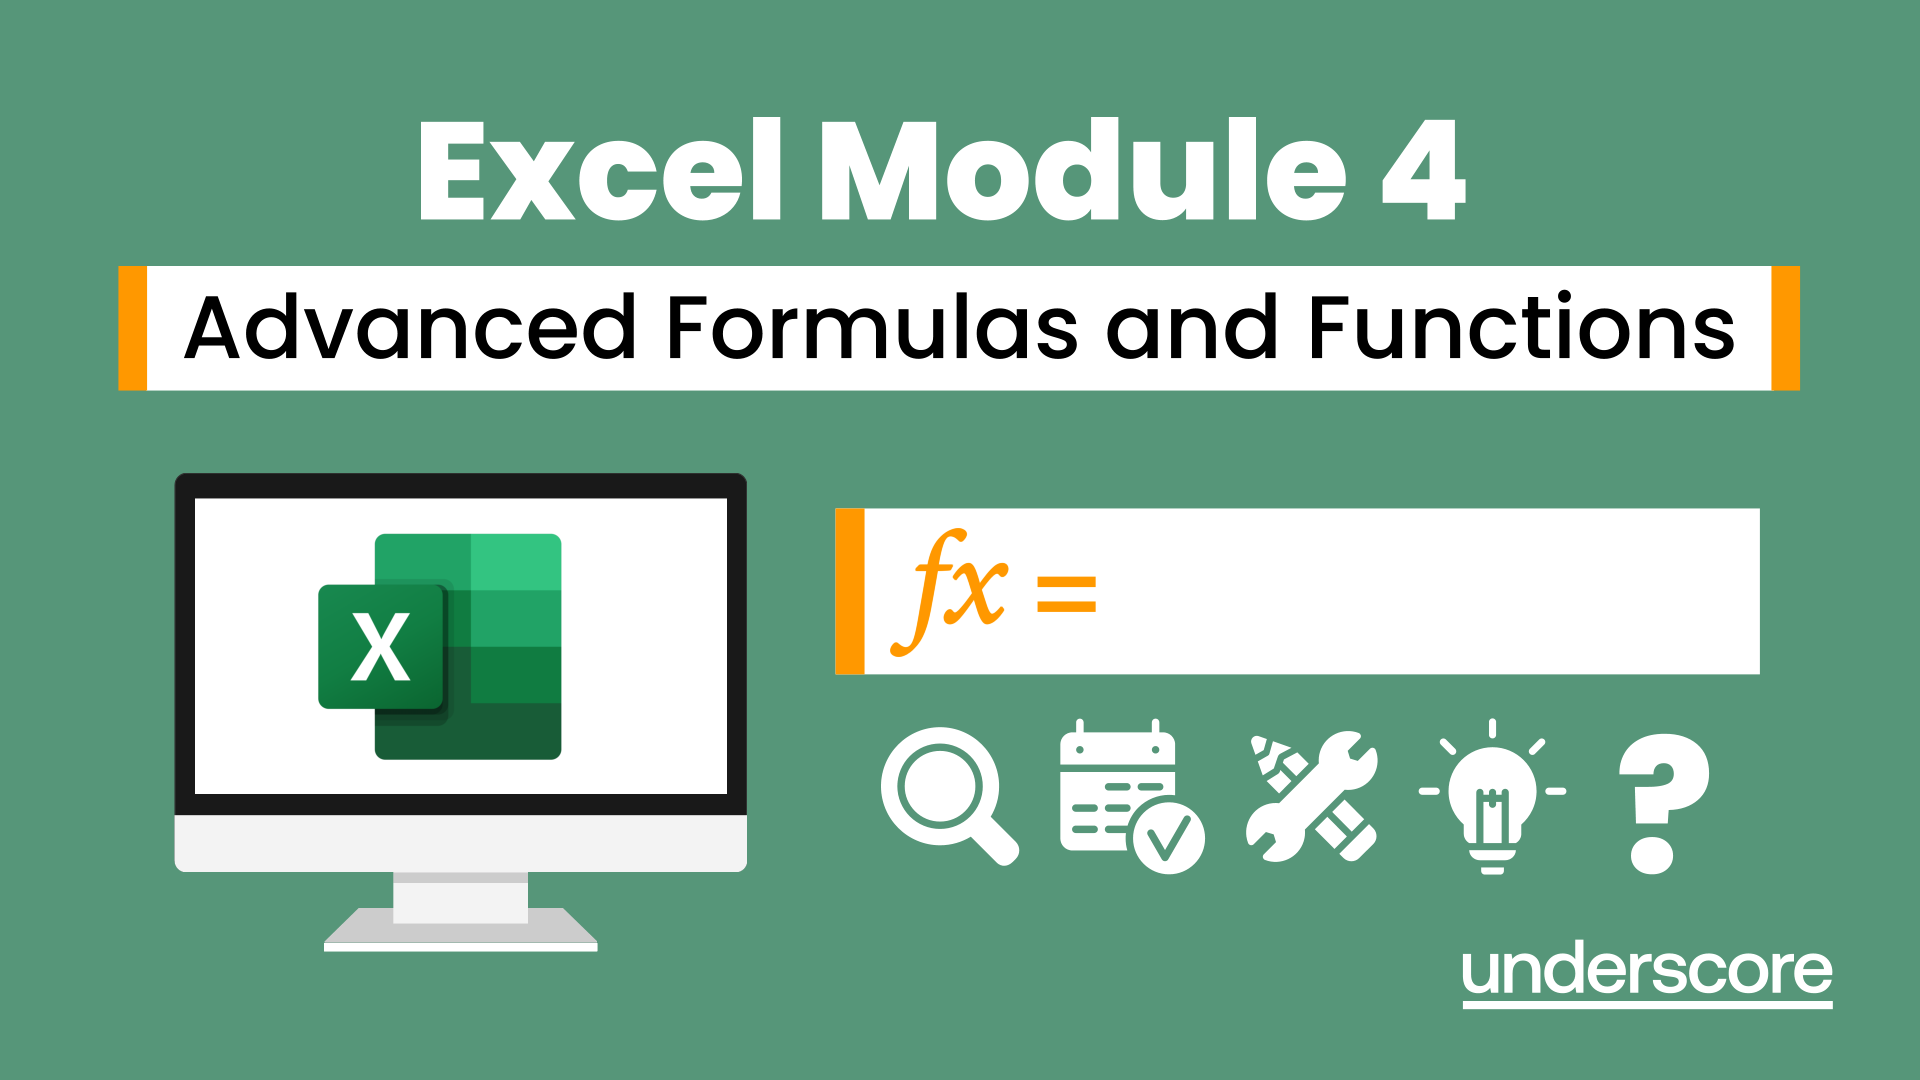 Excel Module 4 Advanced Formulas and Functions